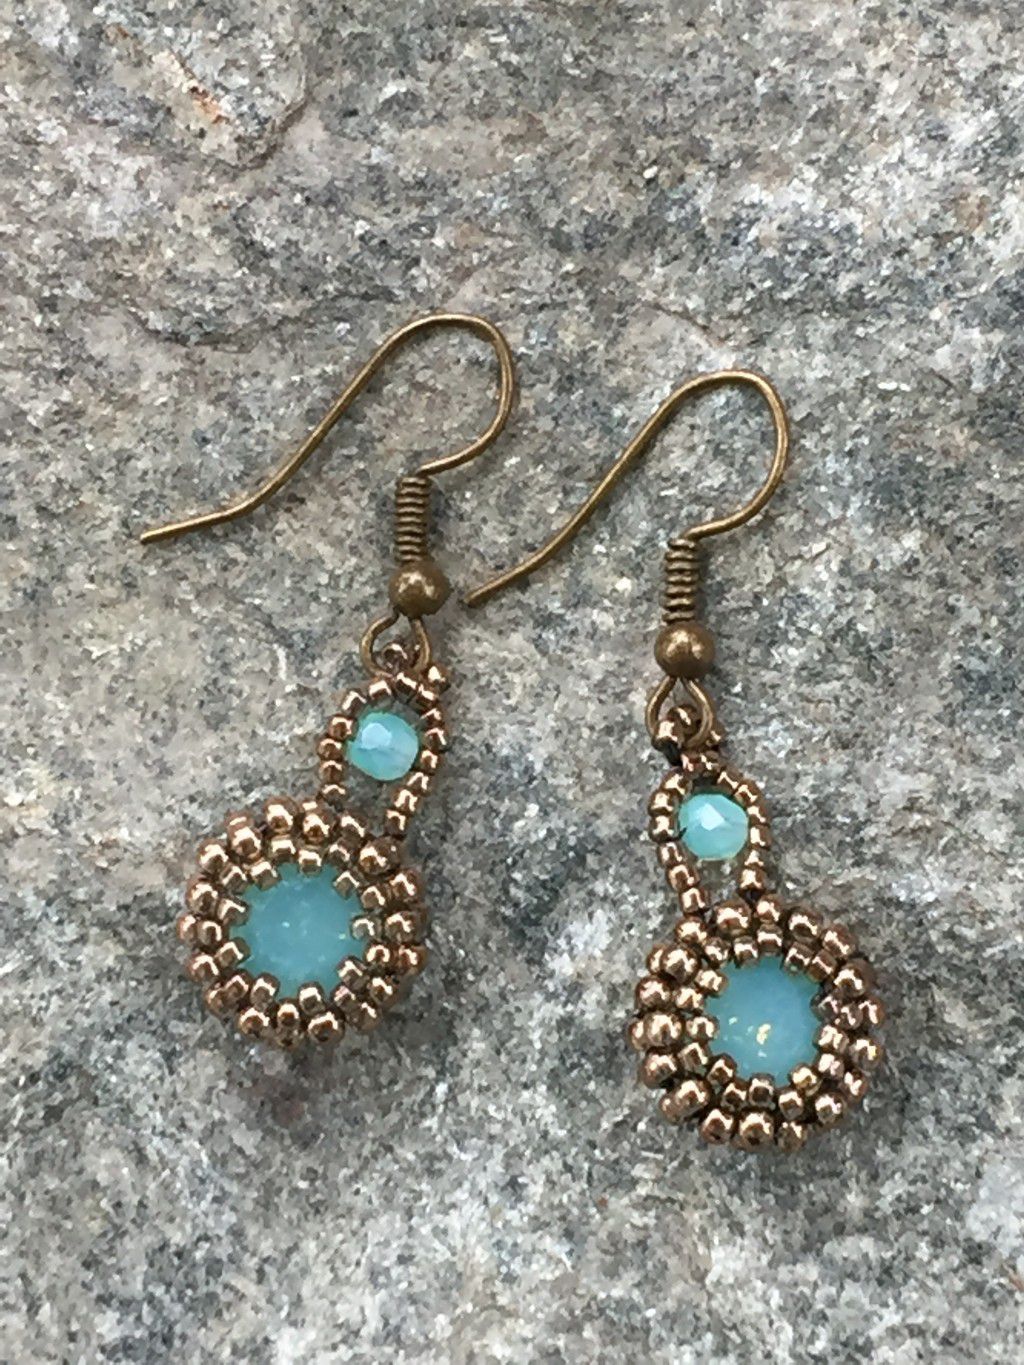 Blue opal dangle earrings with silver beeded bezels and bails